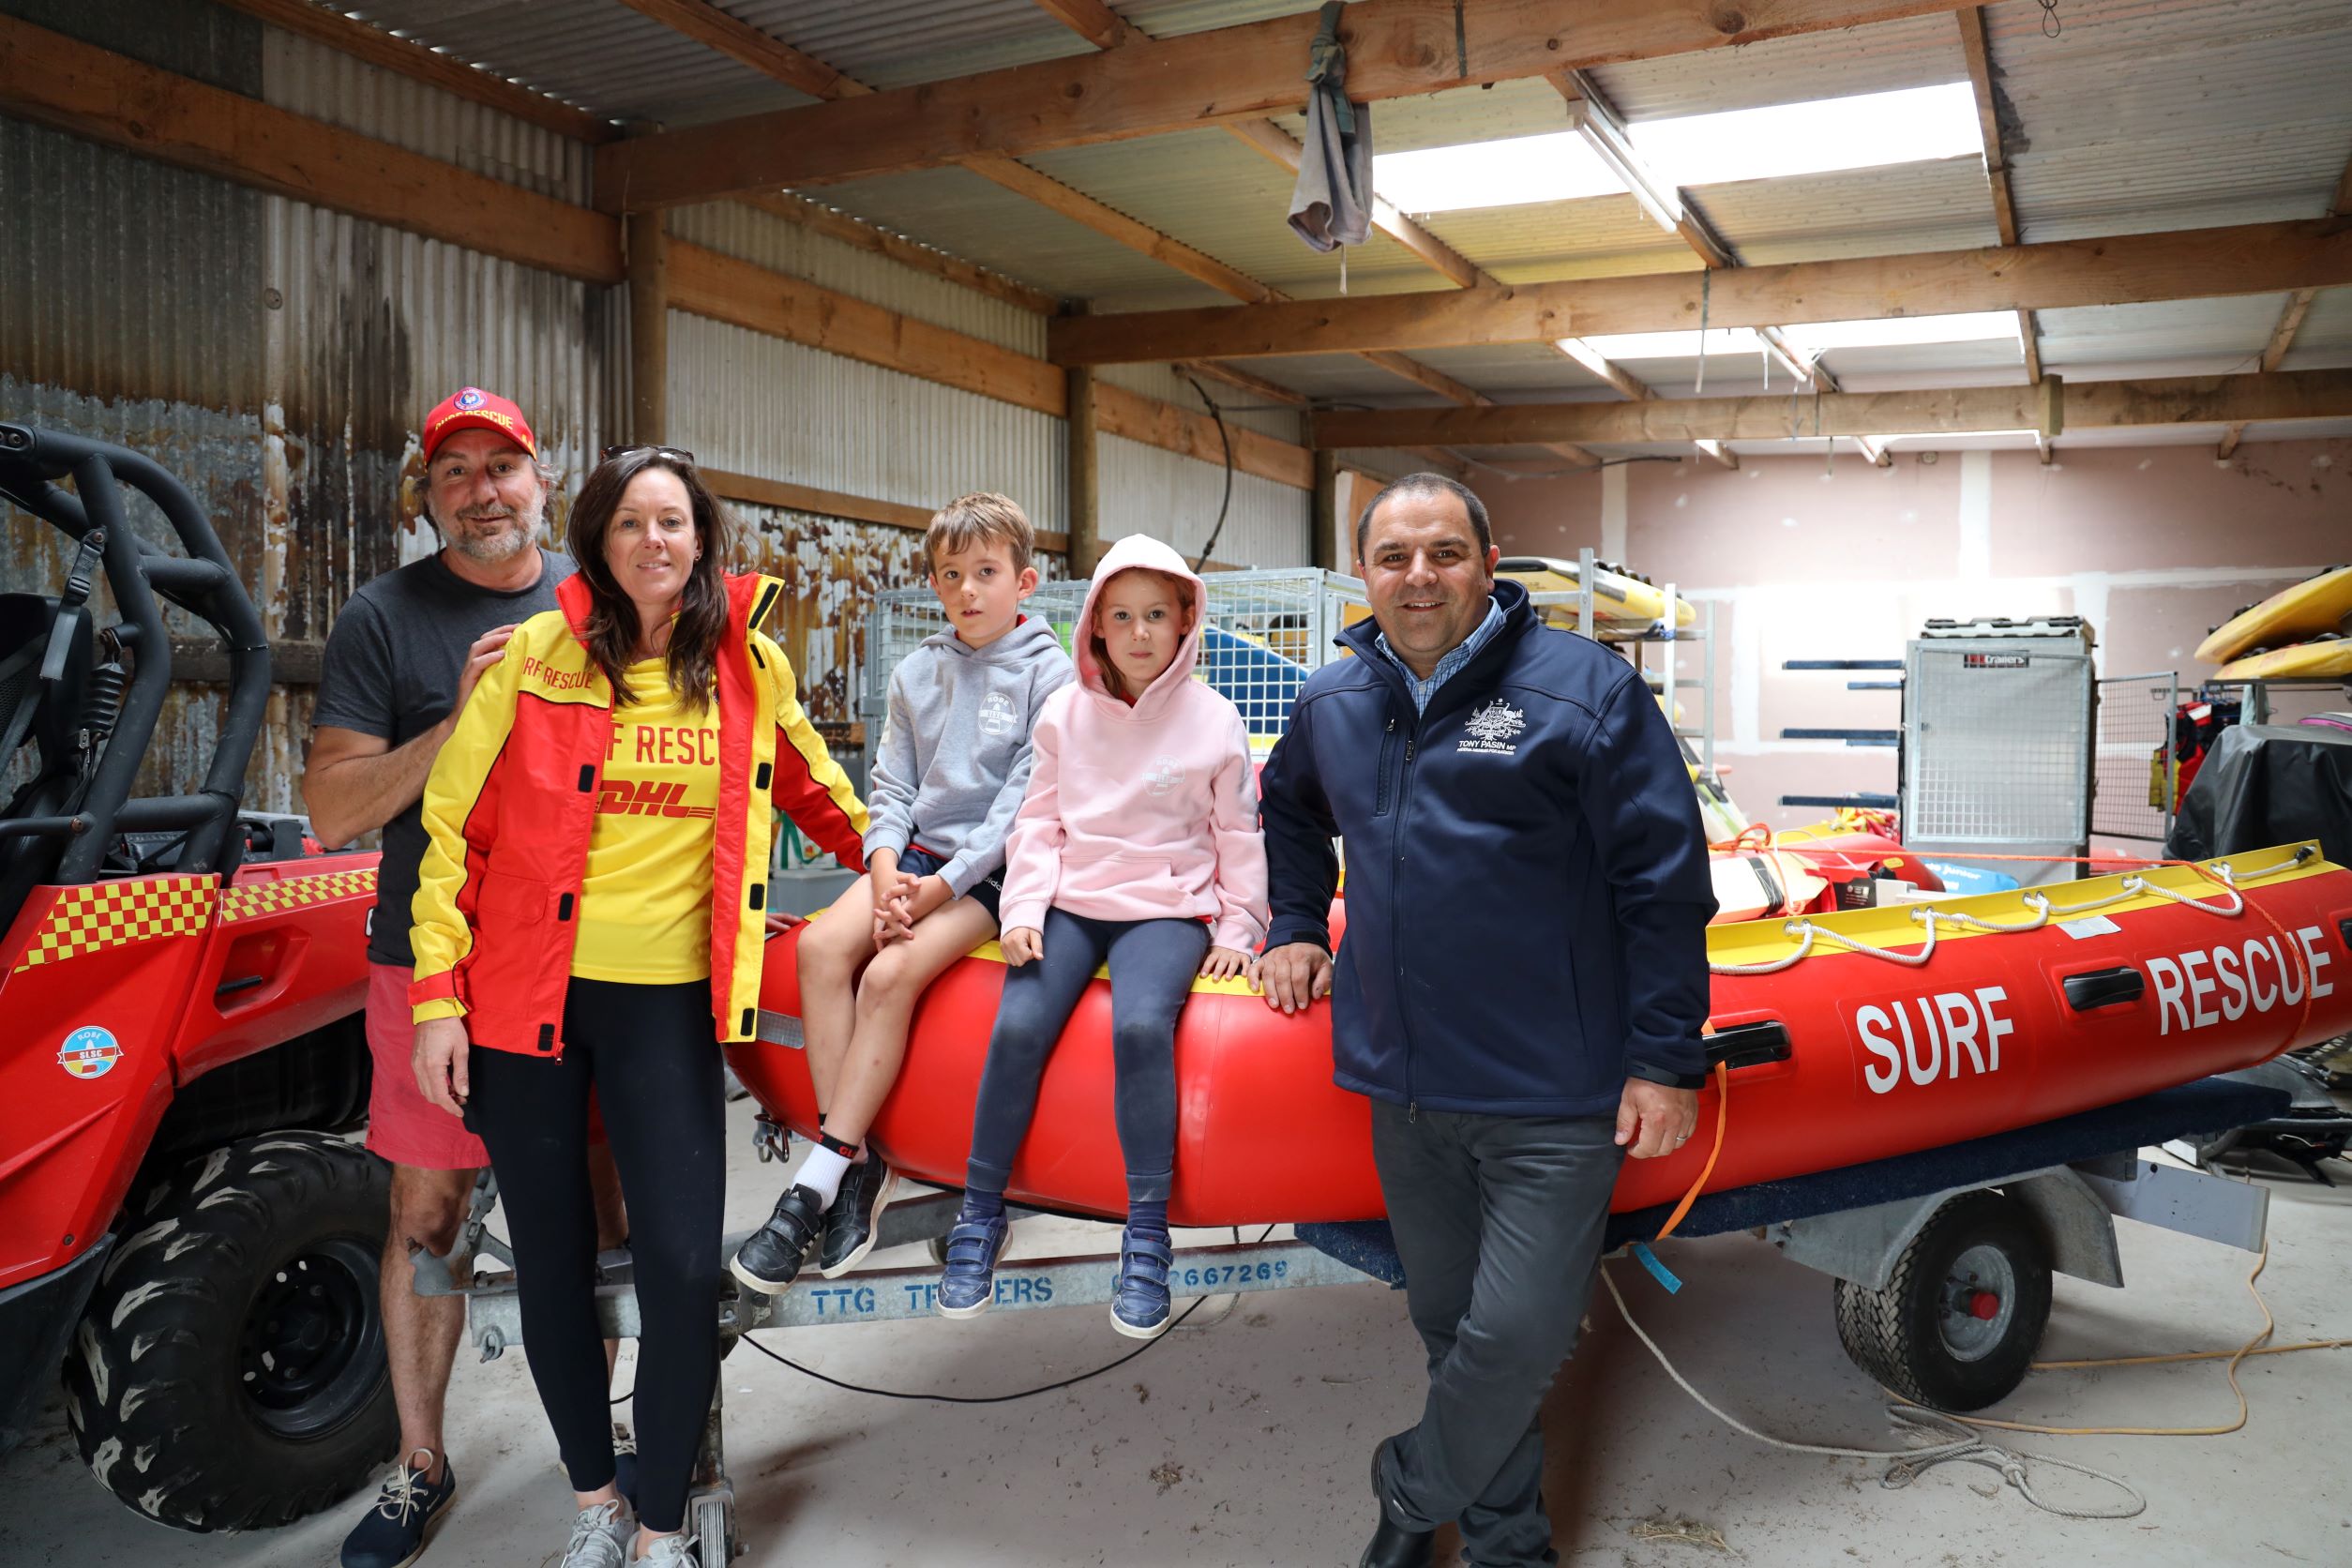 ROBE & BEACHPORT SURF CLUBS BENEFIT FROM NEW SAFETY EQUIPMENT